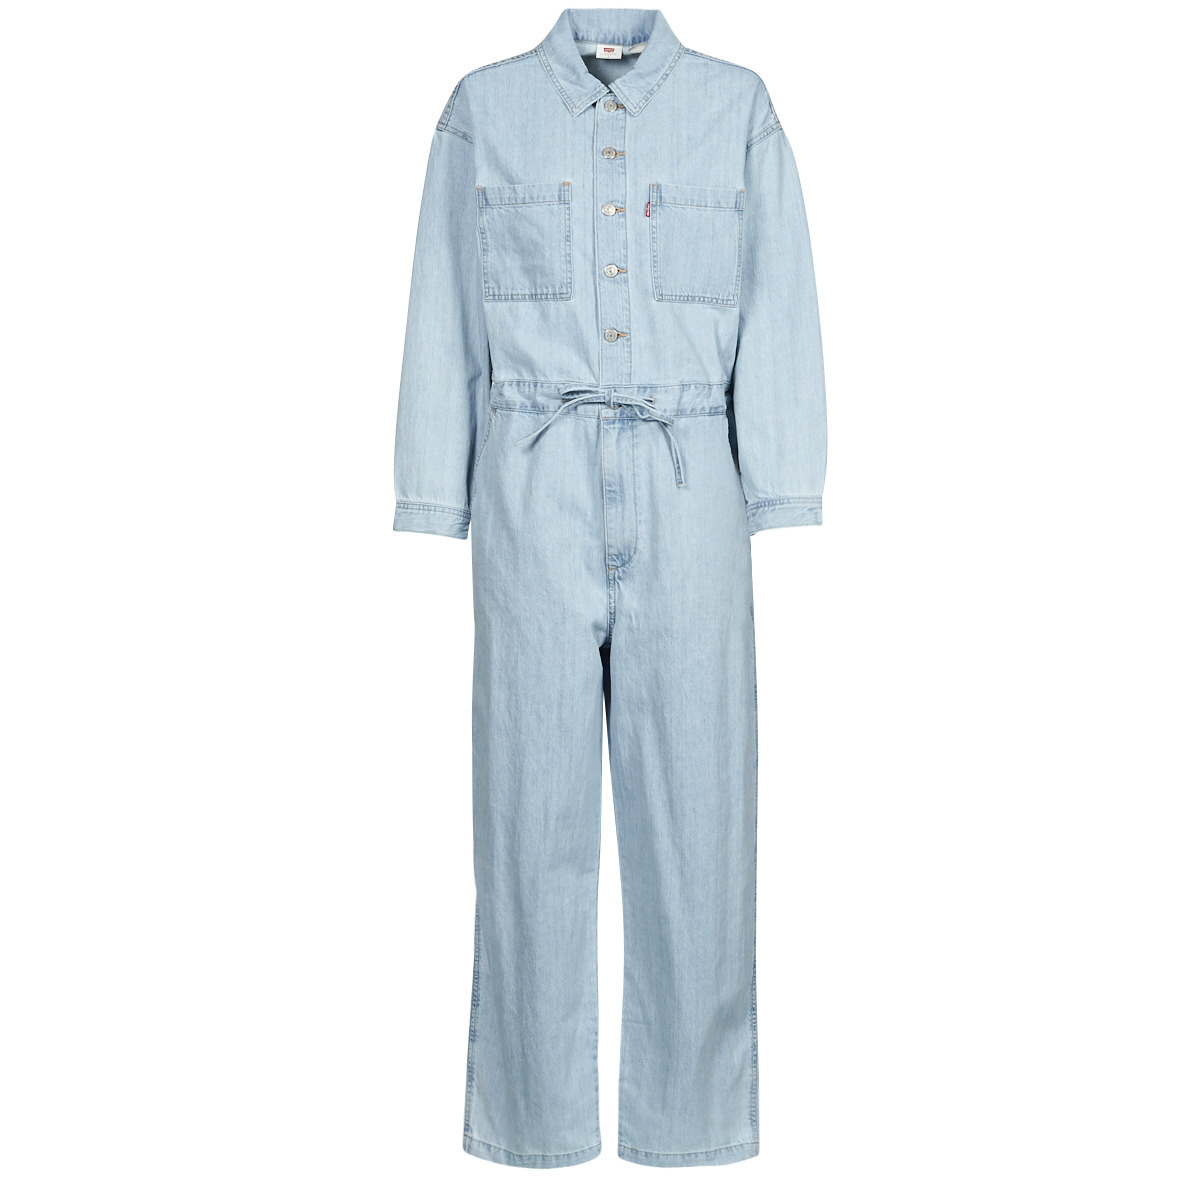 Levi's Blue Jumpsuit for Women at Spartoo GOOFASH